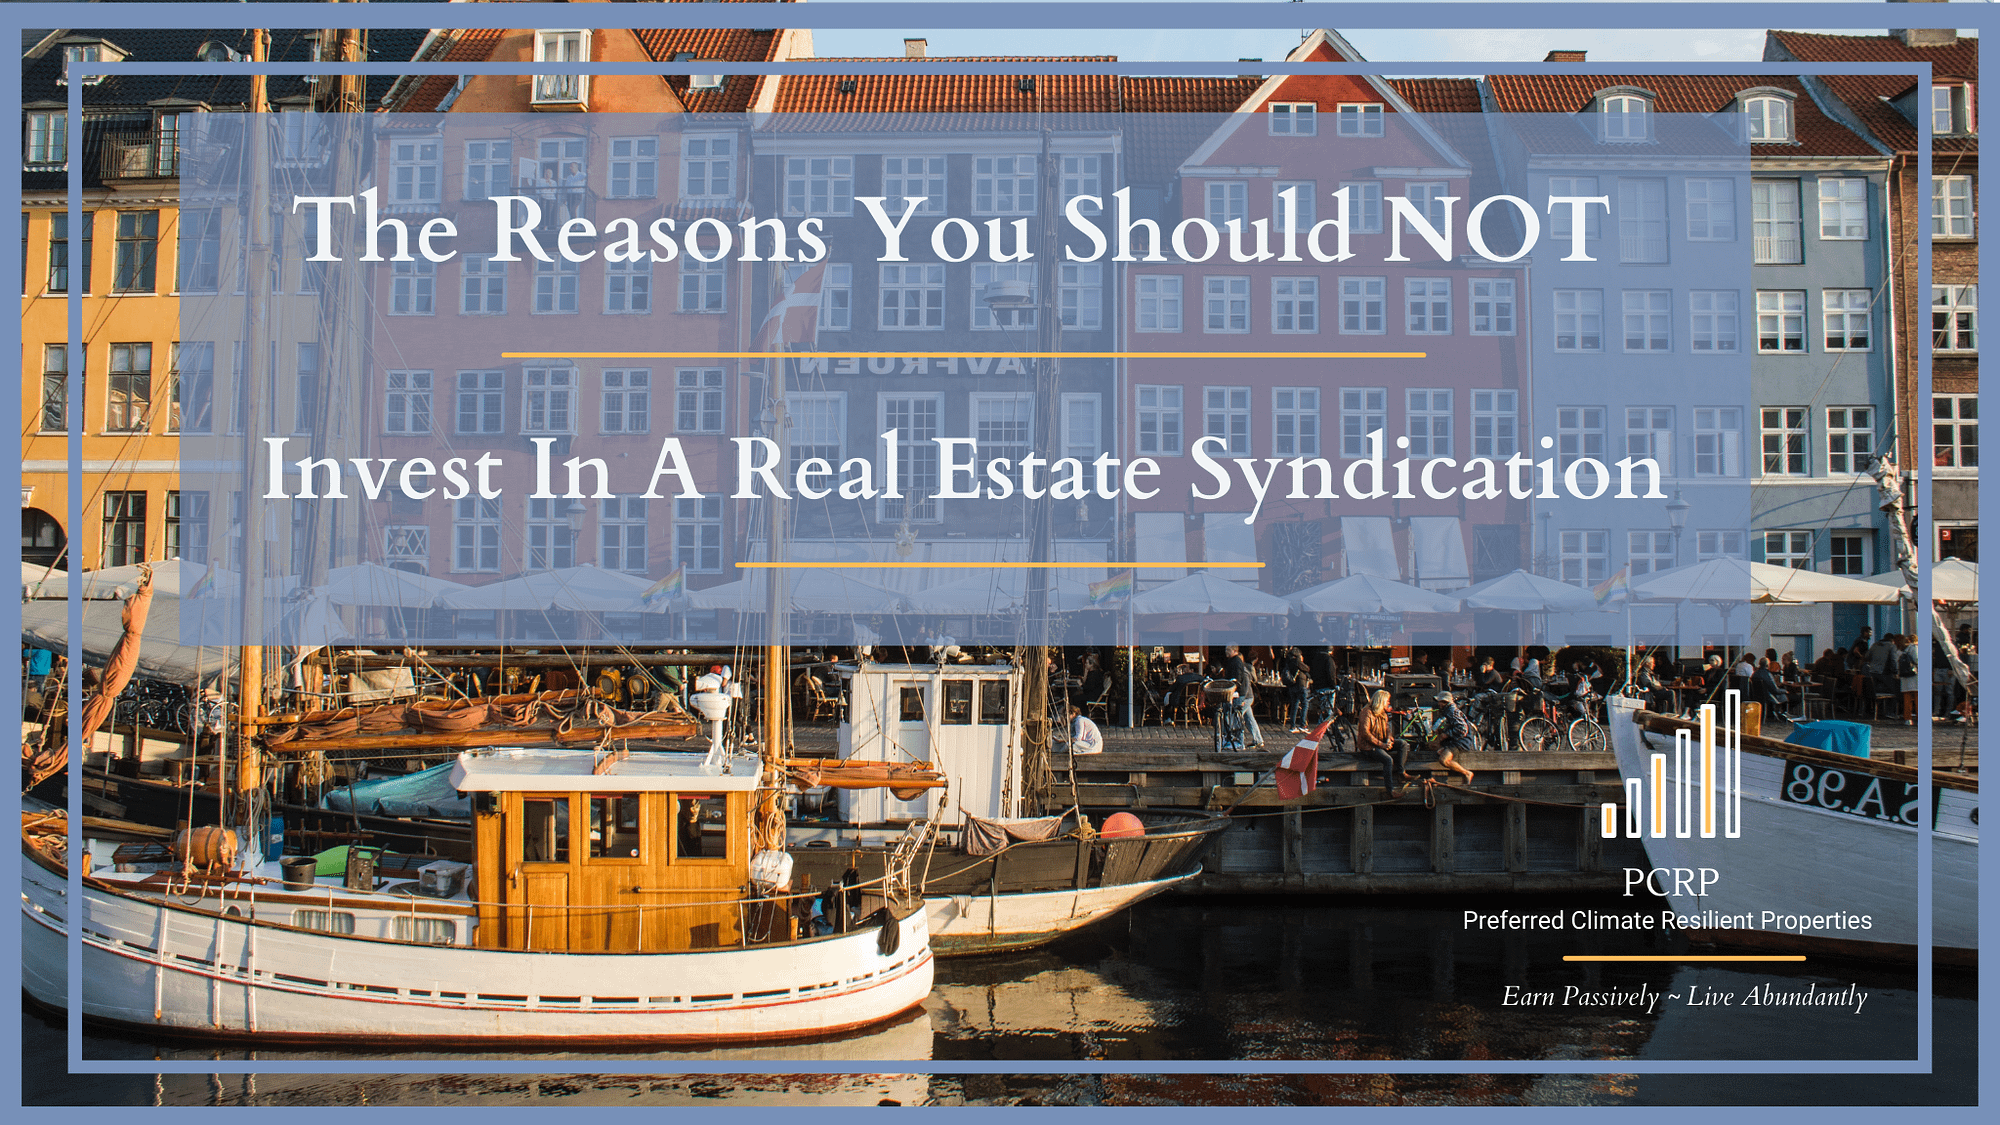 Why You Should Not Invest In a Real Estate Syndication